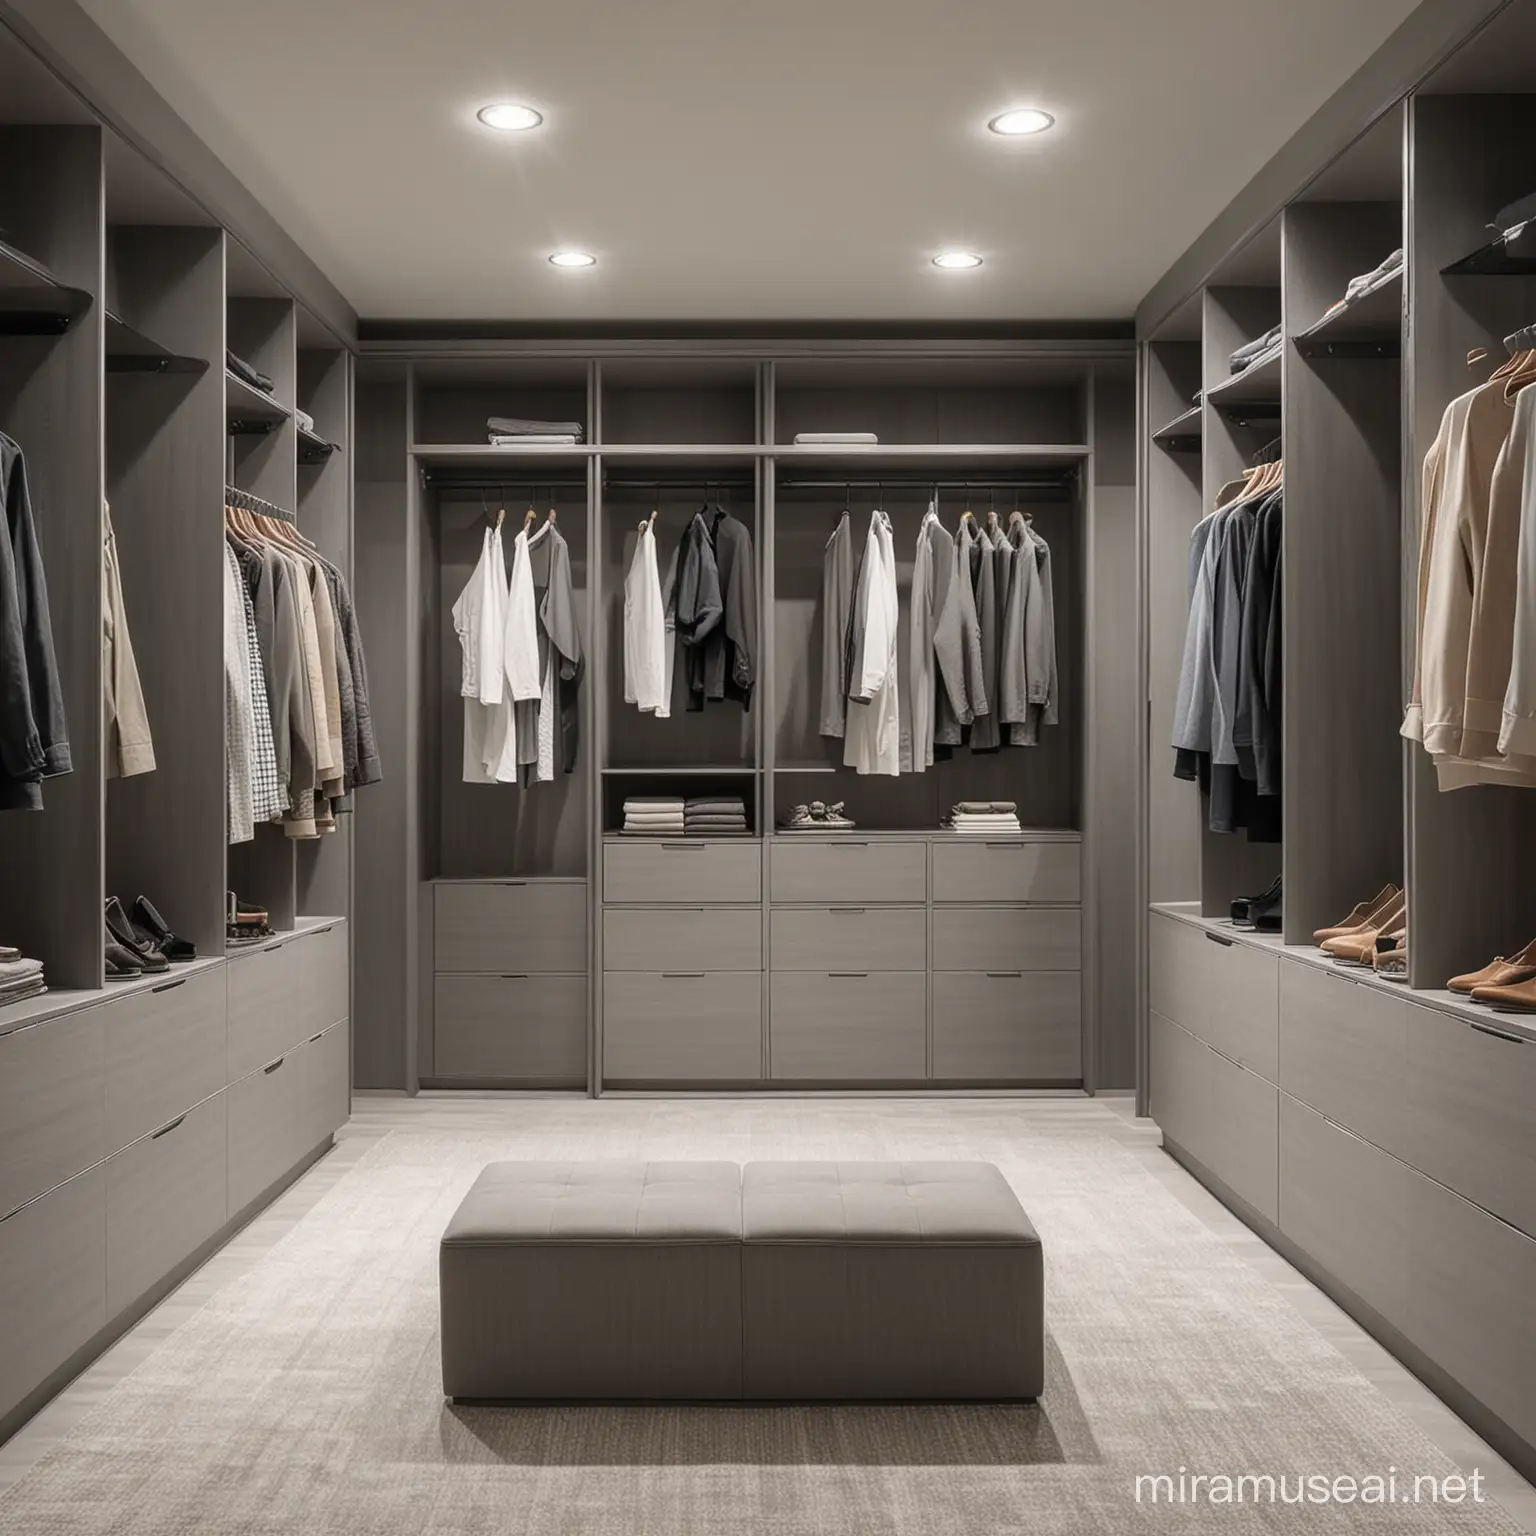 Modern Walkin Closet Design Matte Grey Laminate Cabinets and Neatly Hung Clothes